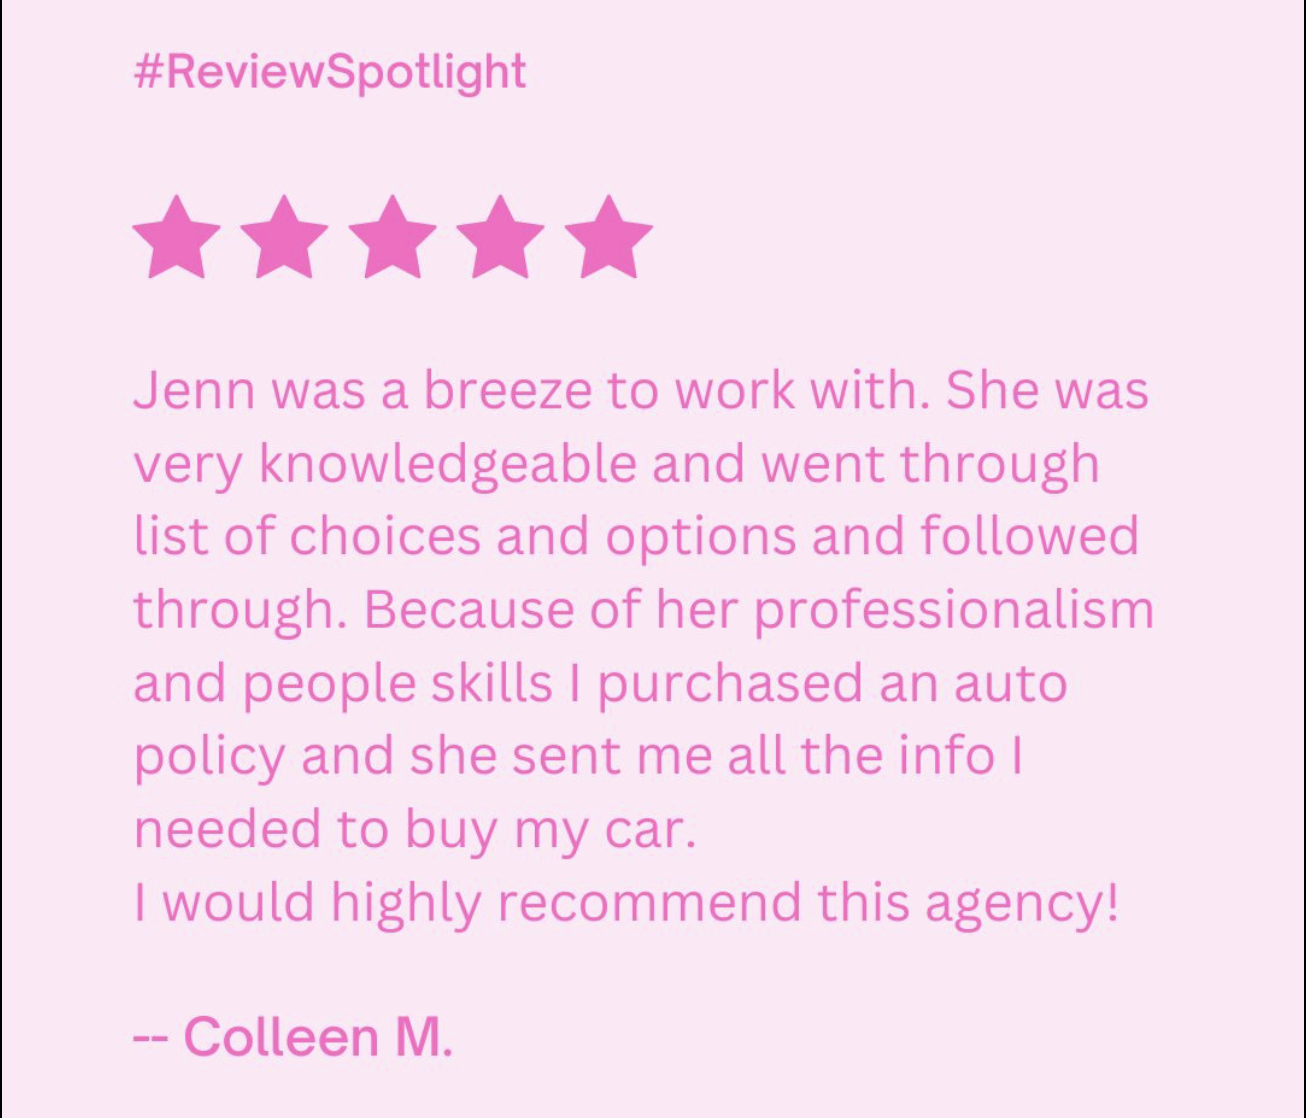 Colleen, we sincerely appreciate the kindness and consideration that went into this review! Jenn is a rockstar, we are so happy to hear you found her to be enjoyable to work with. We value customer service and professionalism in our work and are thrilled to hear that our agency succeeded when helping you purchase an auto policy.